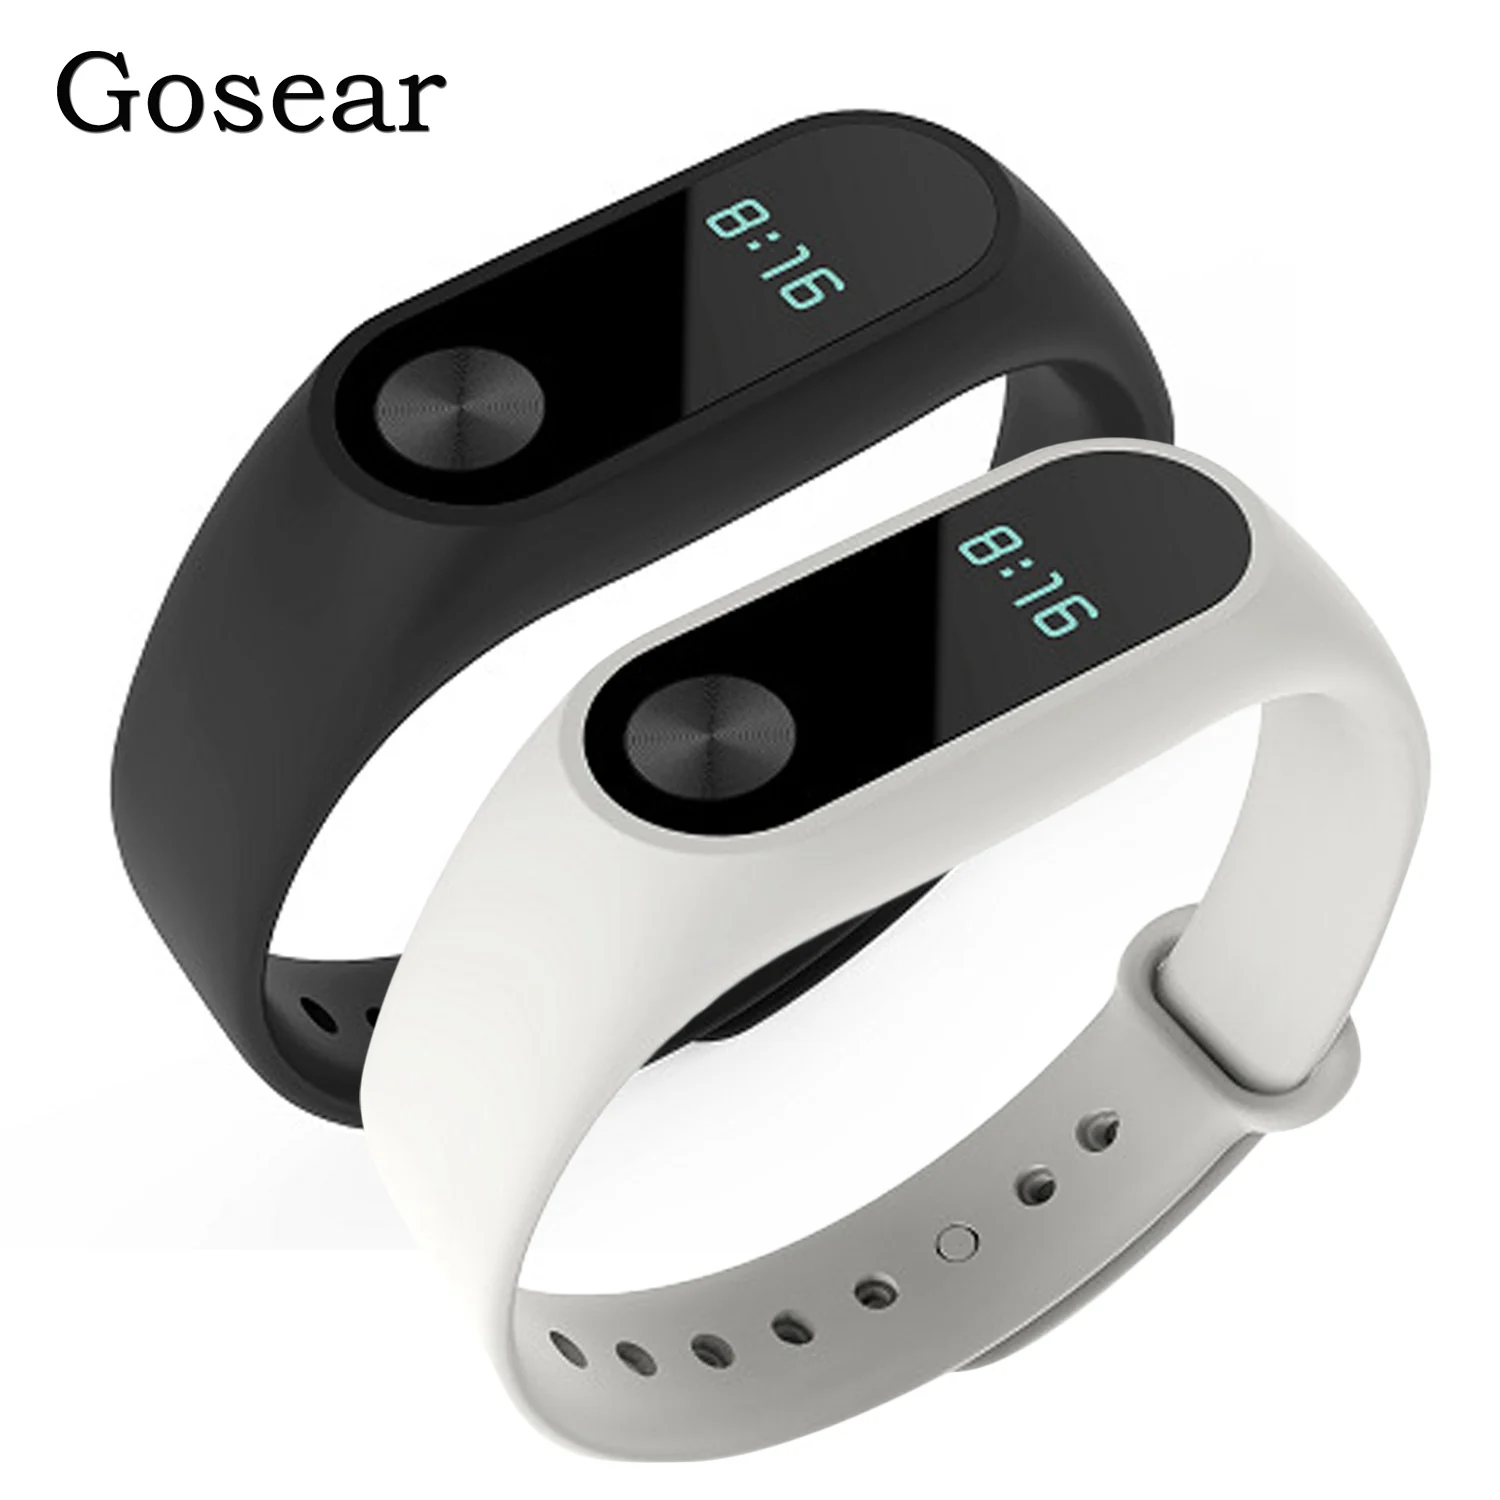 

Gosear 2 PCS Silicone Replacement Wristband Strap Bracelet Smart Band for Xiaomi Xiomi Xiao Mi Band Miband 2 Band2 Accessories